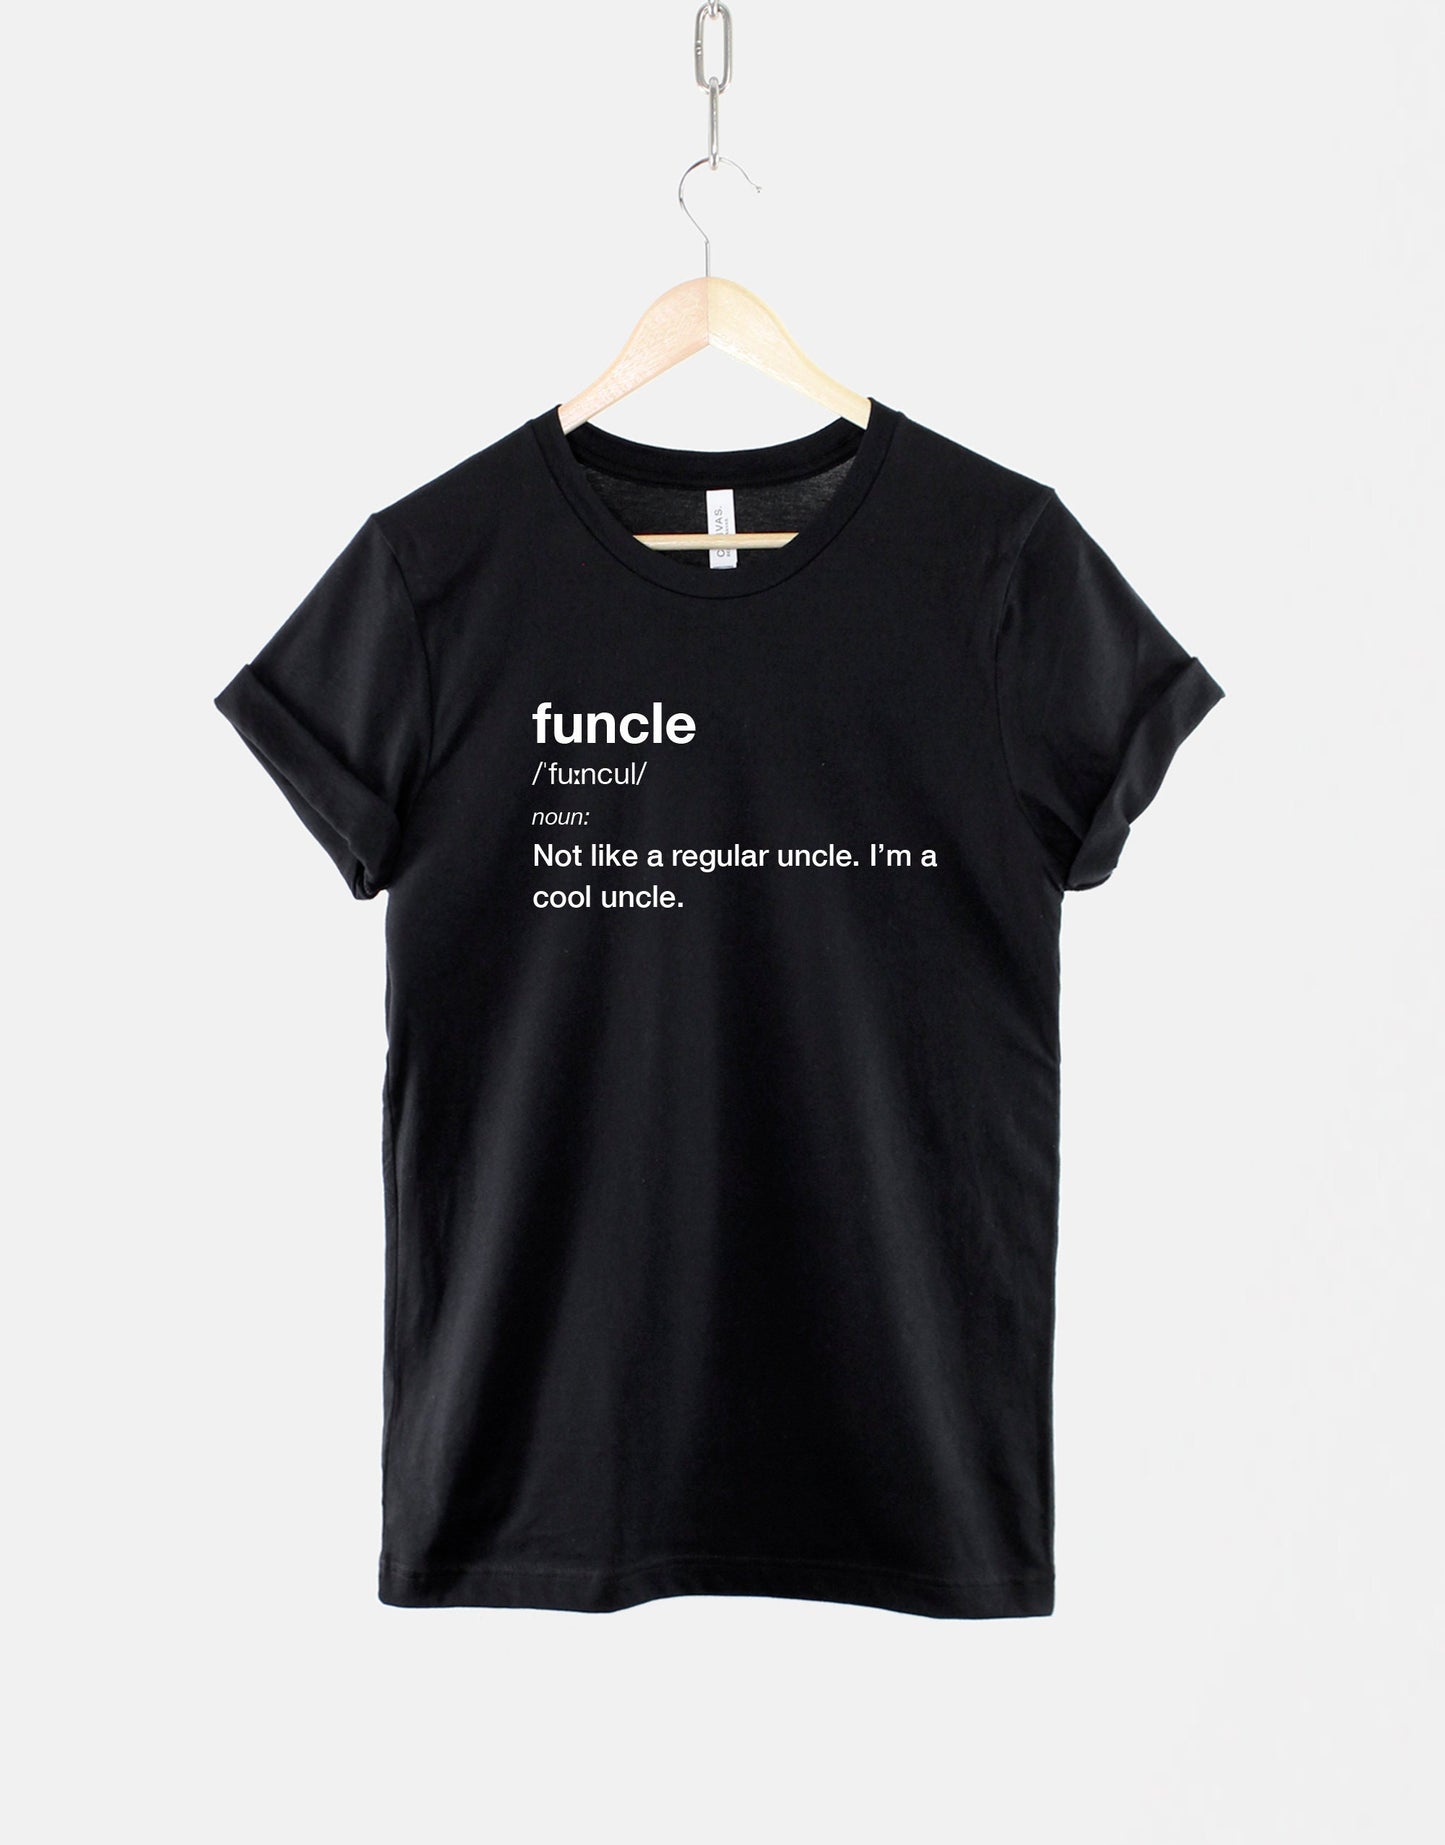 Personalised Funcle T-Shirt - Funcle Definition Shirt - Fun Uncle T-Shirt - Cool Uncle Shirt - Favorite Uncle Best Uncle Ever